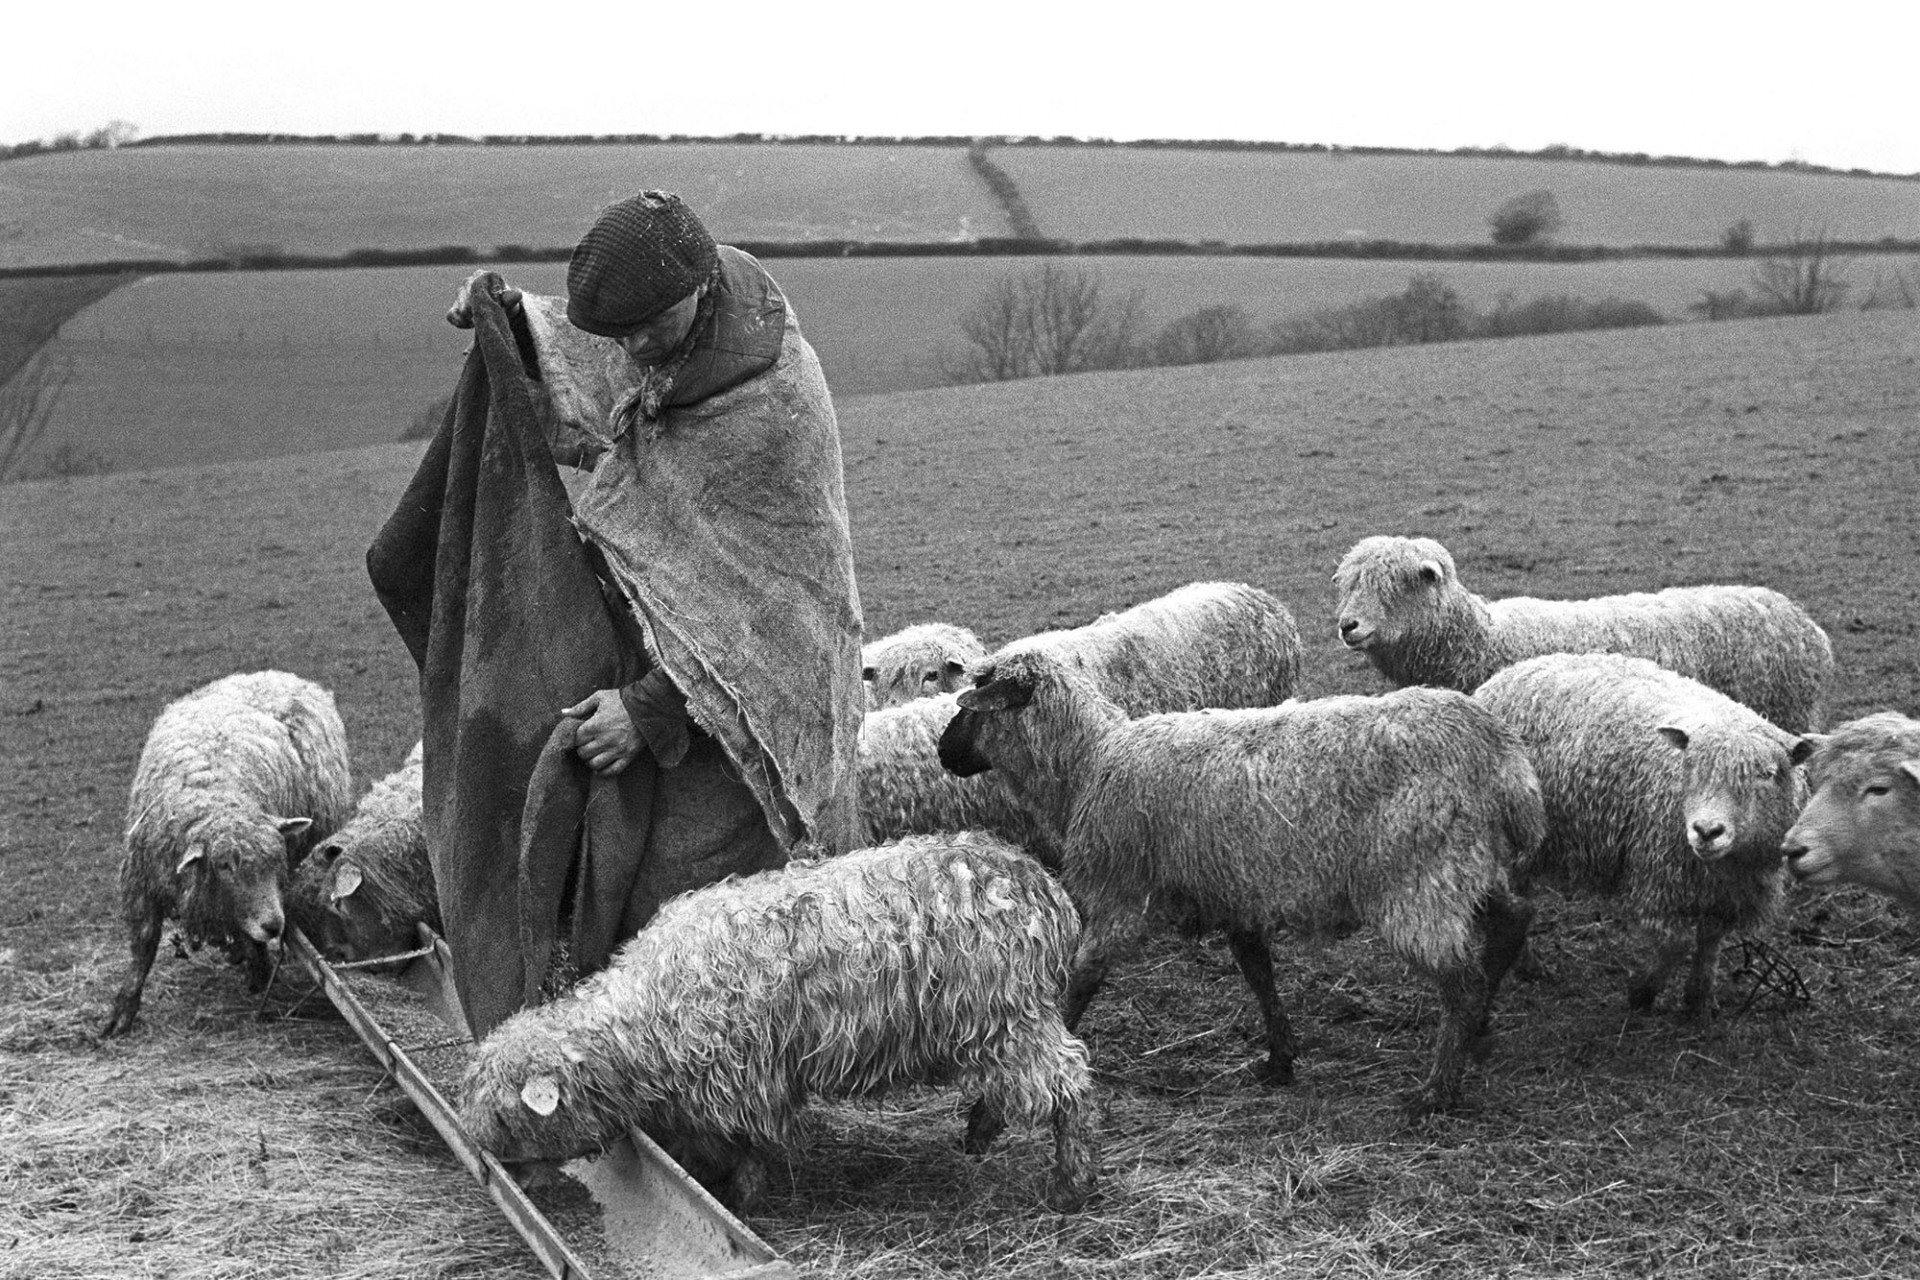 Shepherd, dressed in sacking feeding sheep.
[George Ayre, dressed in sacking, filling a trough with feed for sheep in a field at Ashwell, Dolton.]